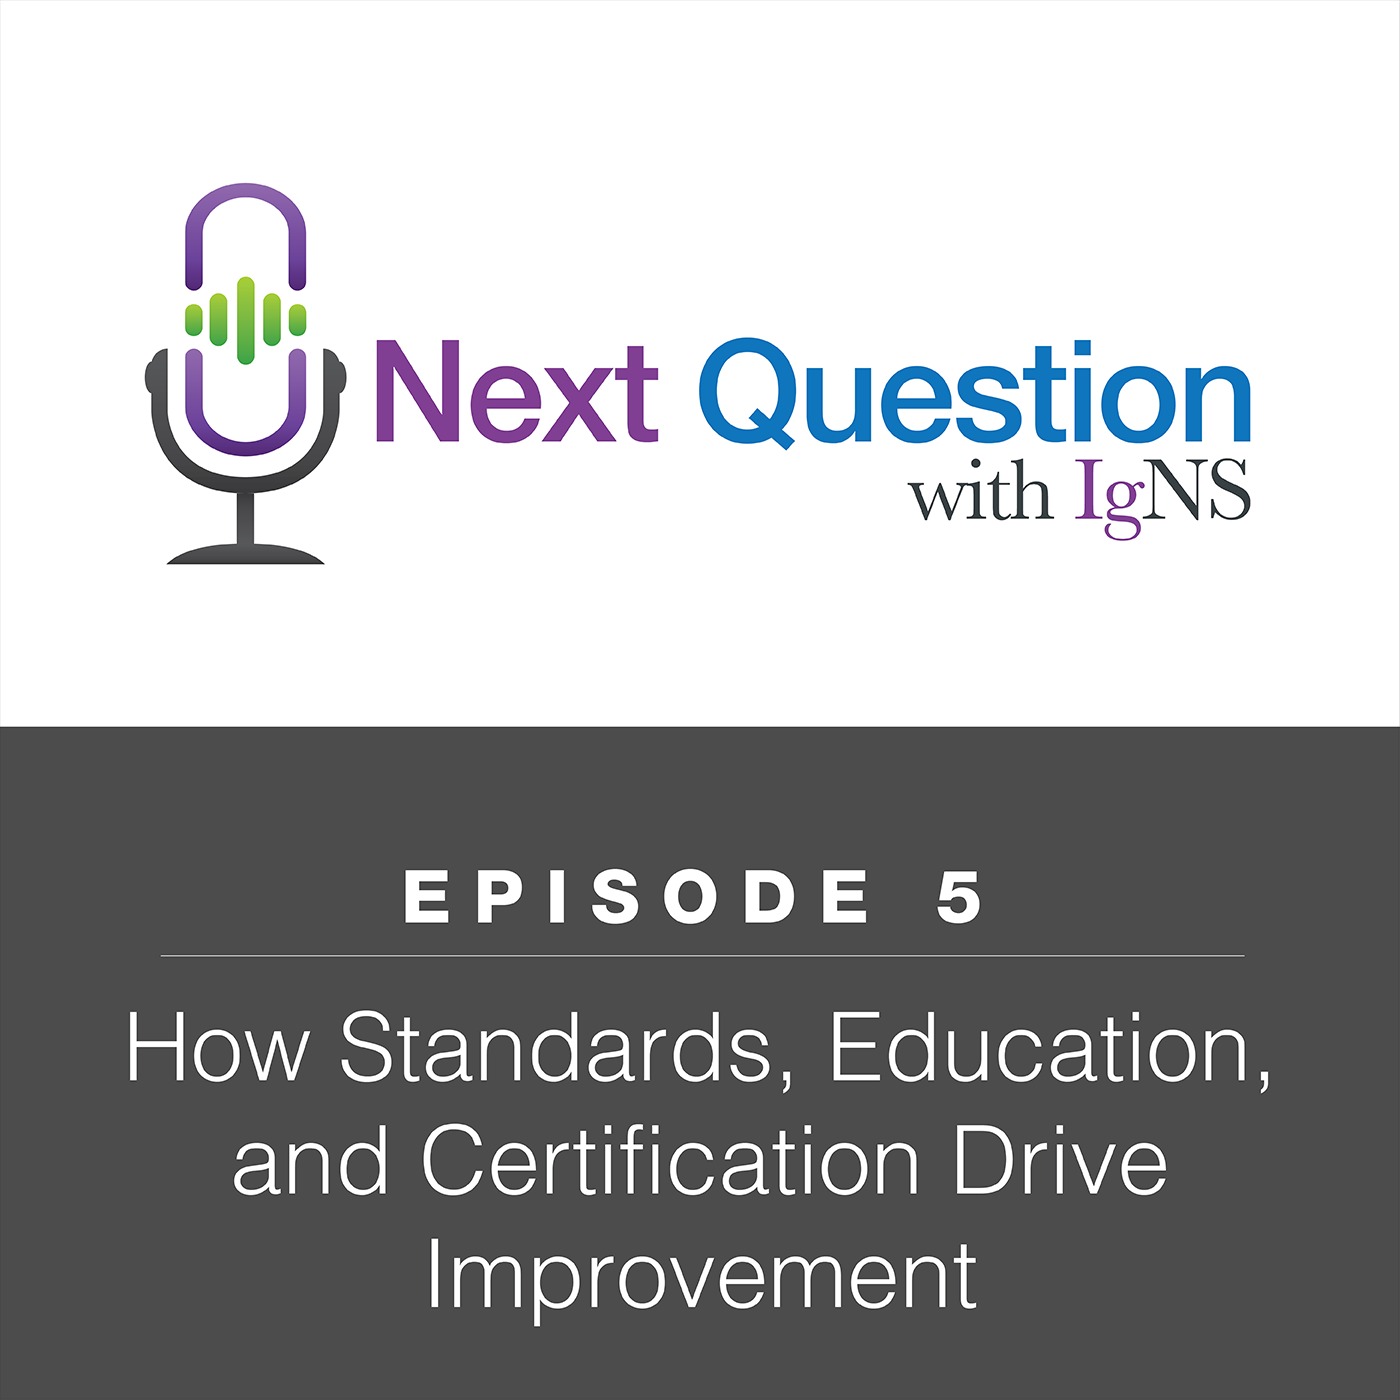 How Standards, Education, and Certification Drive Improvement